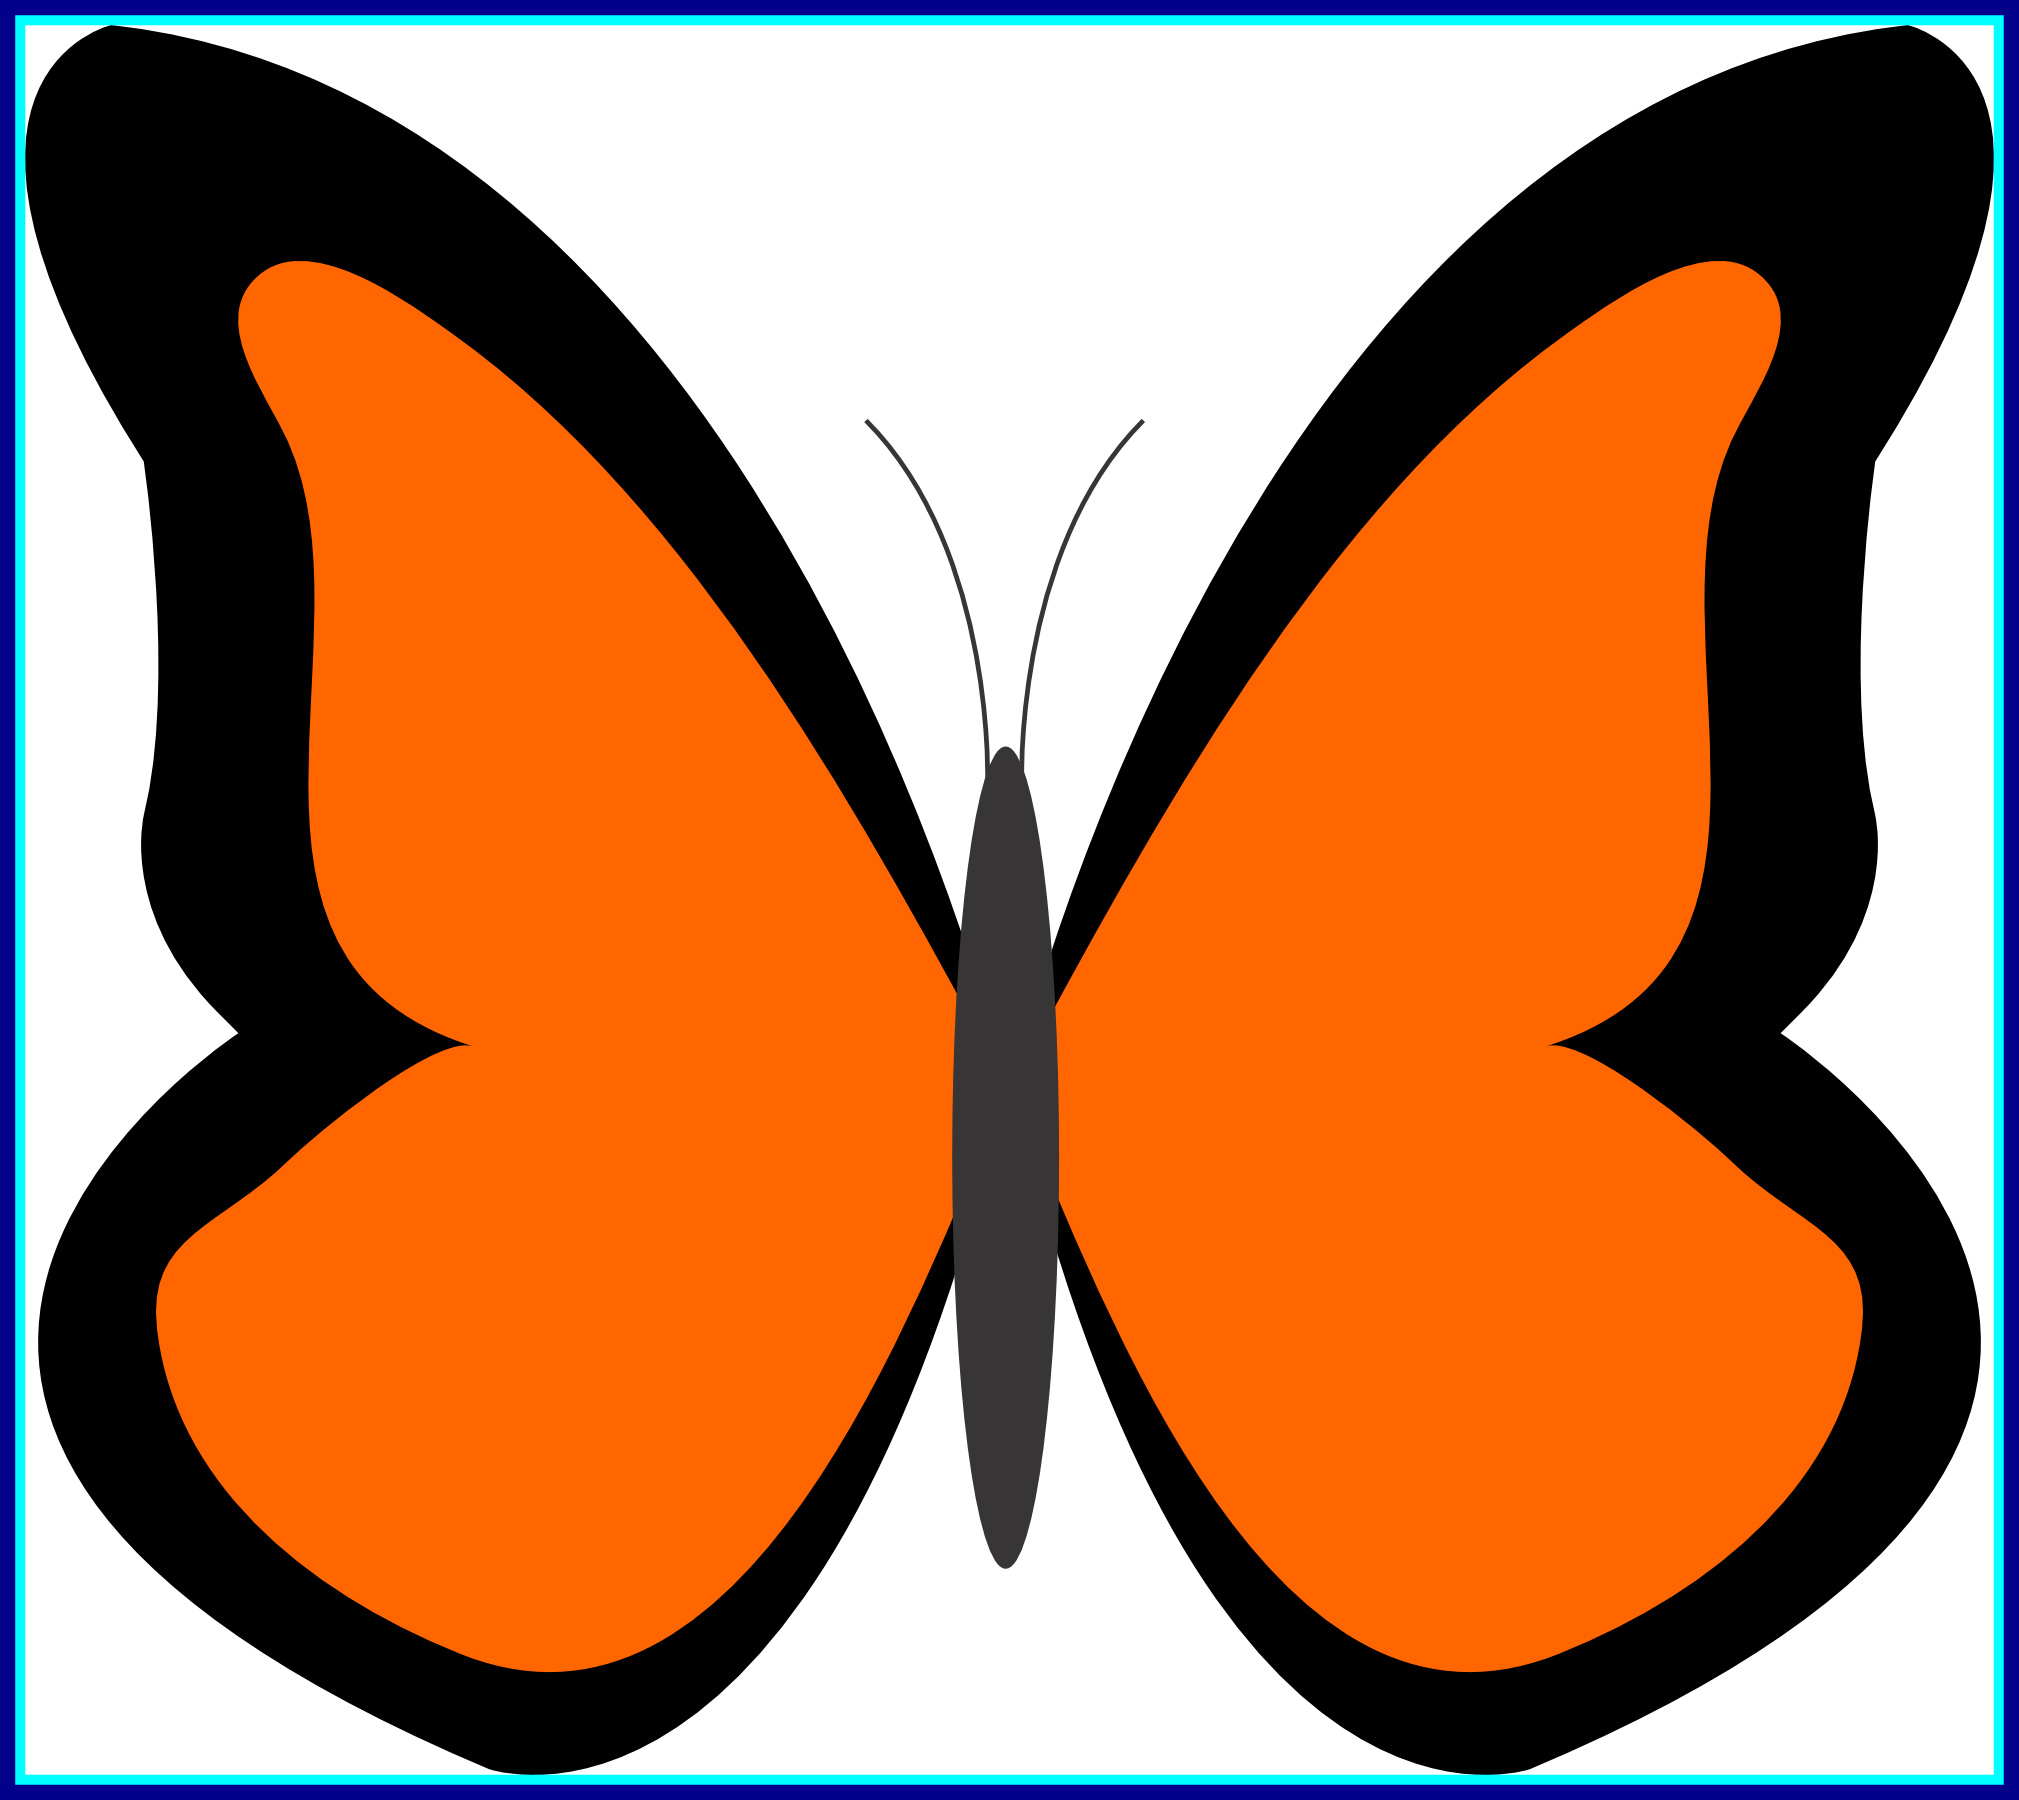 Bug clipart popular. Appealing simple butterfly pict